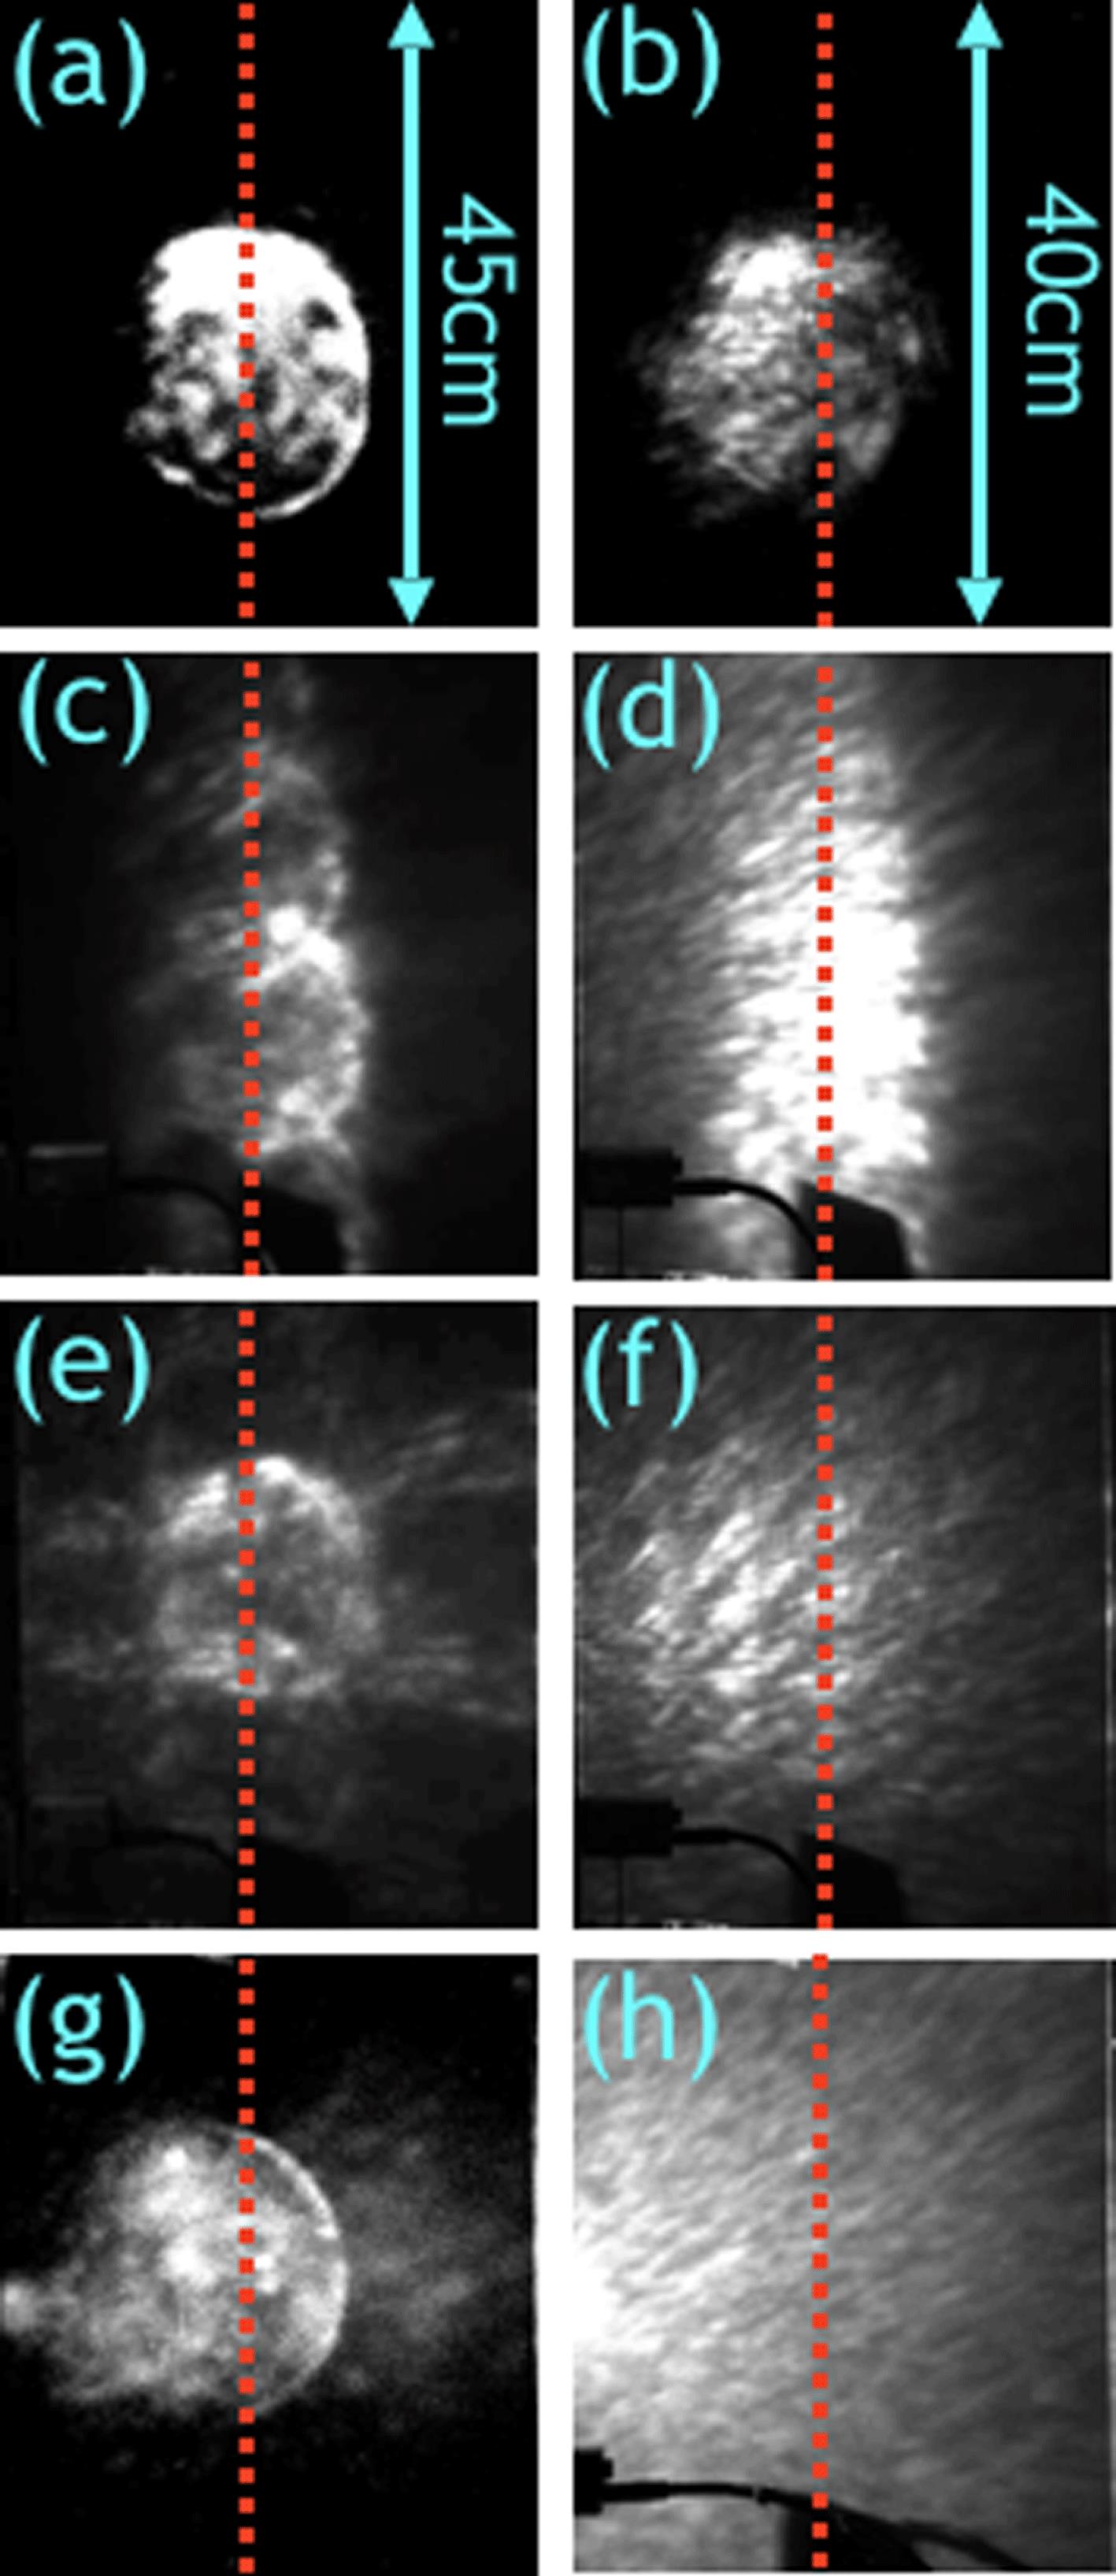 Measurements of the spatial-intensity distribution of the laser light reflected from the plasma critical density surface, at fundamental and second harmonic frequencies, as captured on a scatter screen, with dashed red line denoting the expected specular direction. Images (a) and (b) correspond to the $\unicode[STIX]{x1D714}_{L}$ and $2\unicode[STIX]{x1D714}_{L}$ signals for the flat foil target, respectively. (c) and (d) are the same for the groove target, (e) and (f) are for the pillar target, and (g) and (h) are obtained with the needle target. The scale presented in (a) and (b) is the same for all $\unicode[STIX]{x1D714}_{L}$ and $2\unicode[STIX]{x1D714}_{L}$ images, respectively.